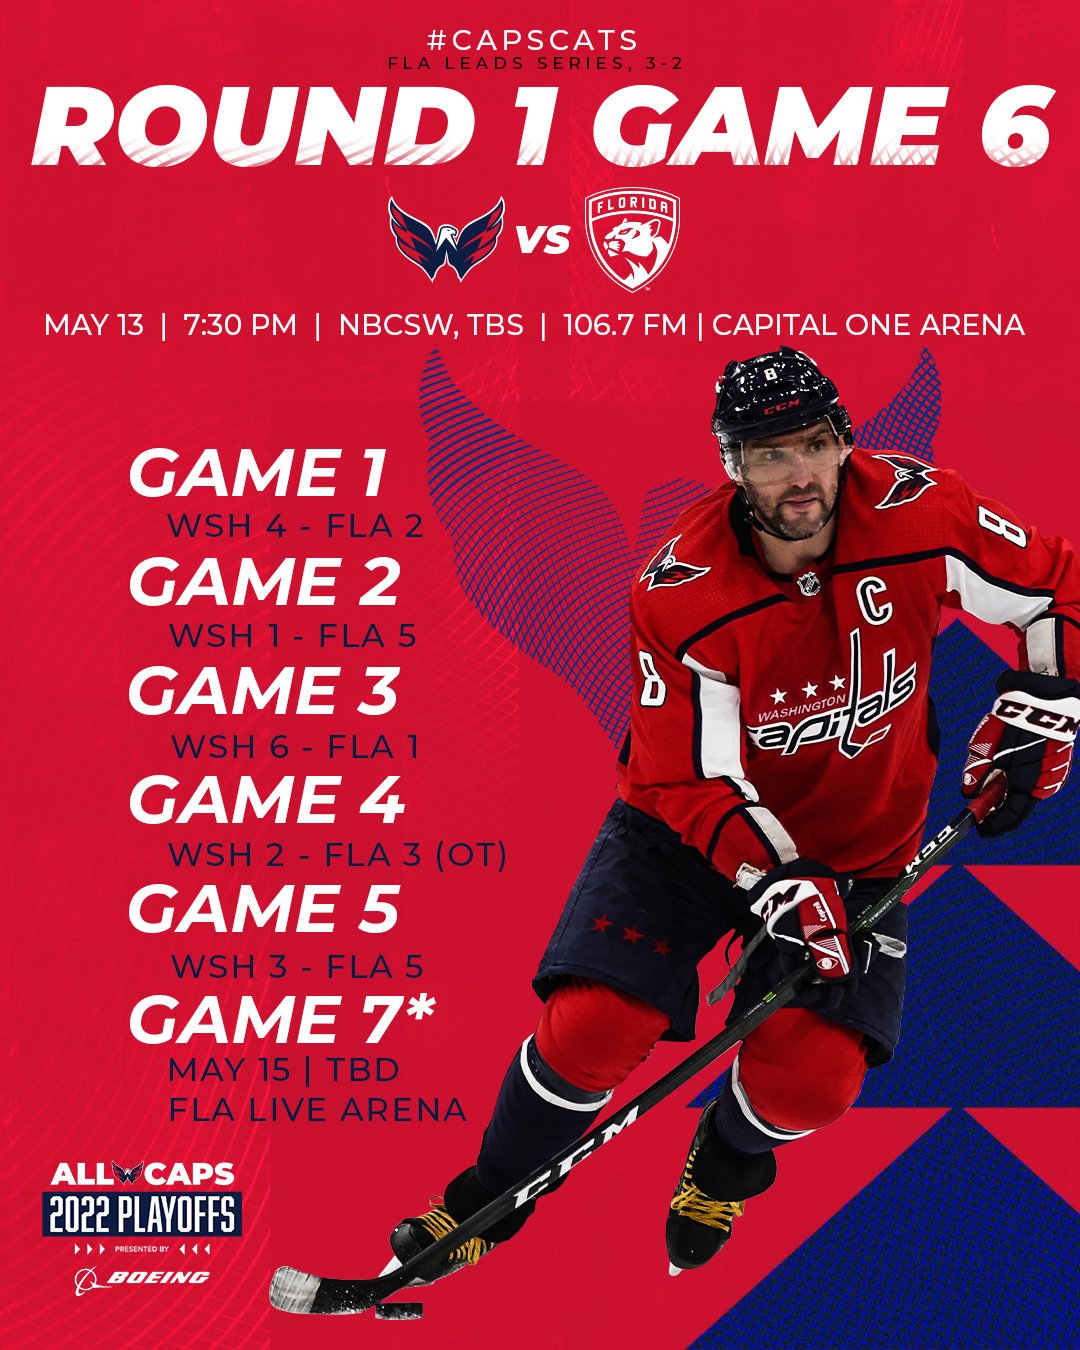 Washington Capitals - Gear up for the #ALLCAPS #ALLBLOOM before